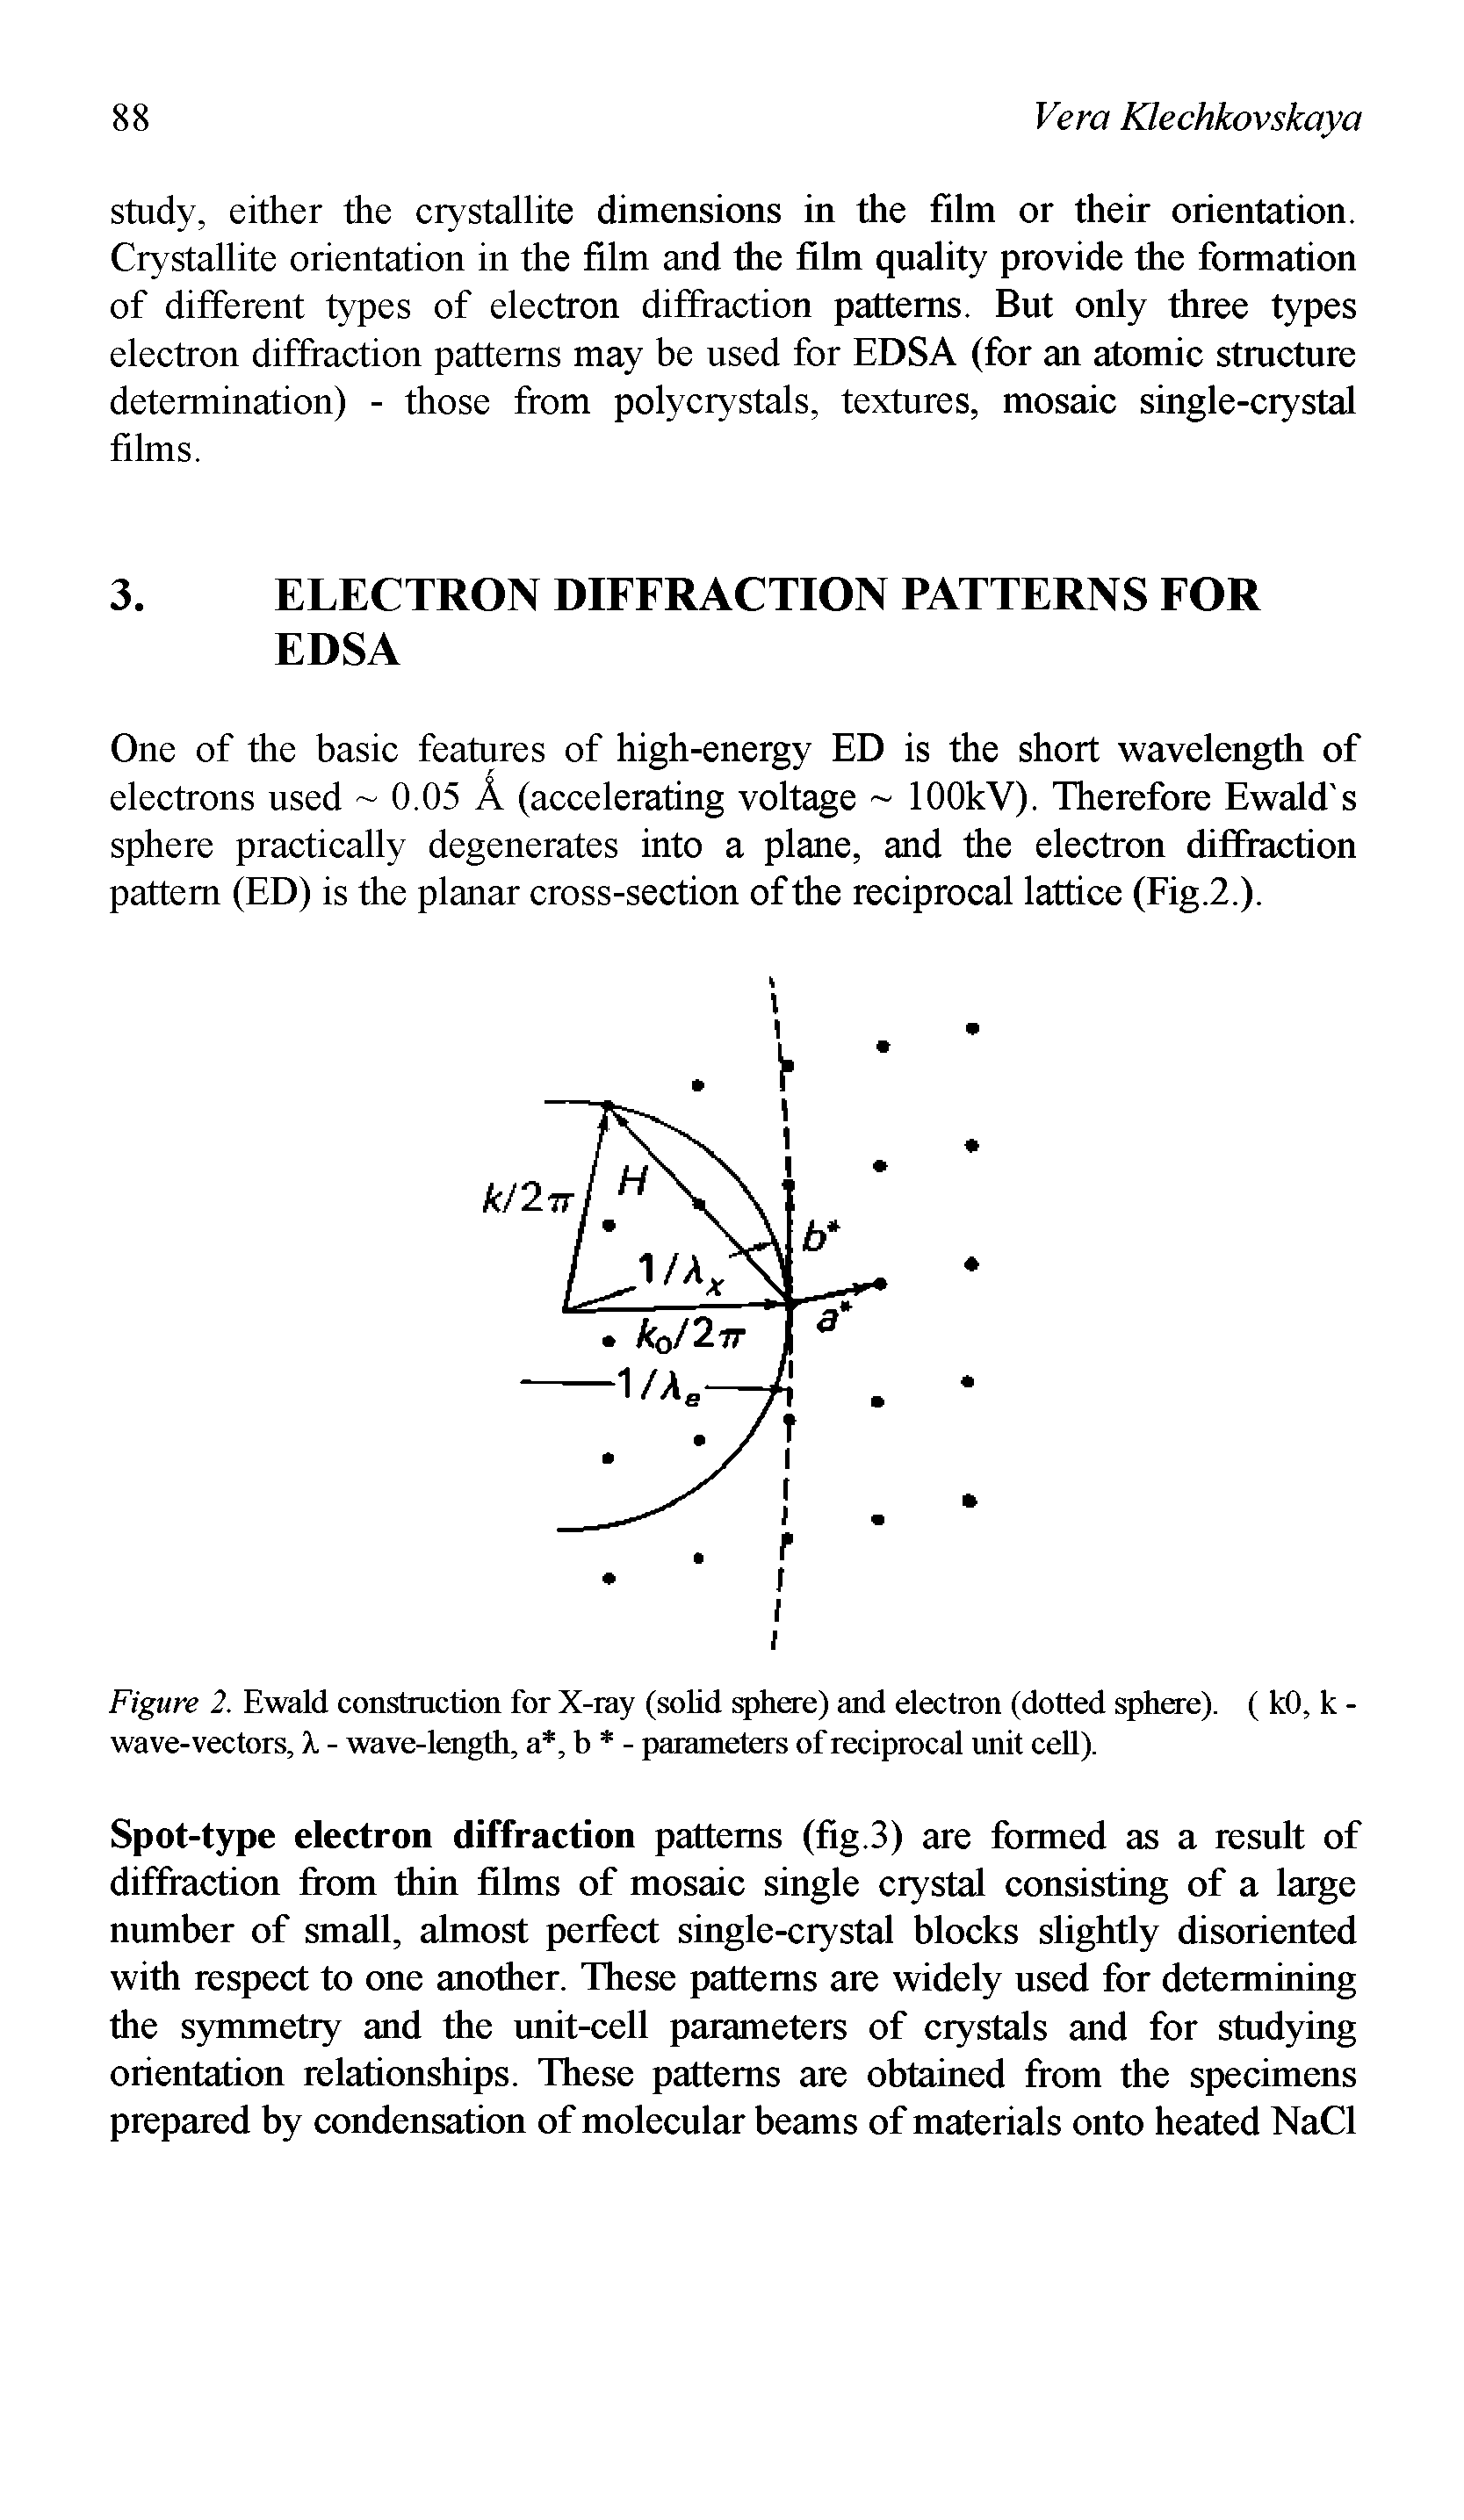 Figure 2. Ewald construction for X-ray (soUd sphere) and electron (dotted sphere). ( kO, k wave-vectors, X - wave-length, a, b - parameters of reciprocal unit cell).